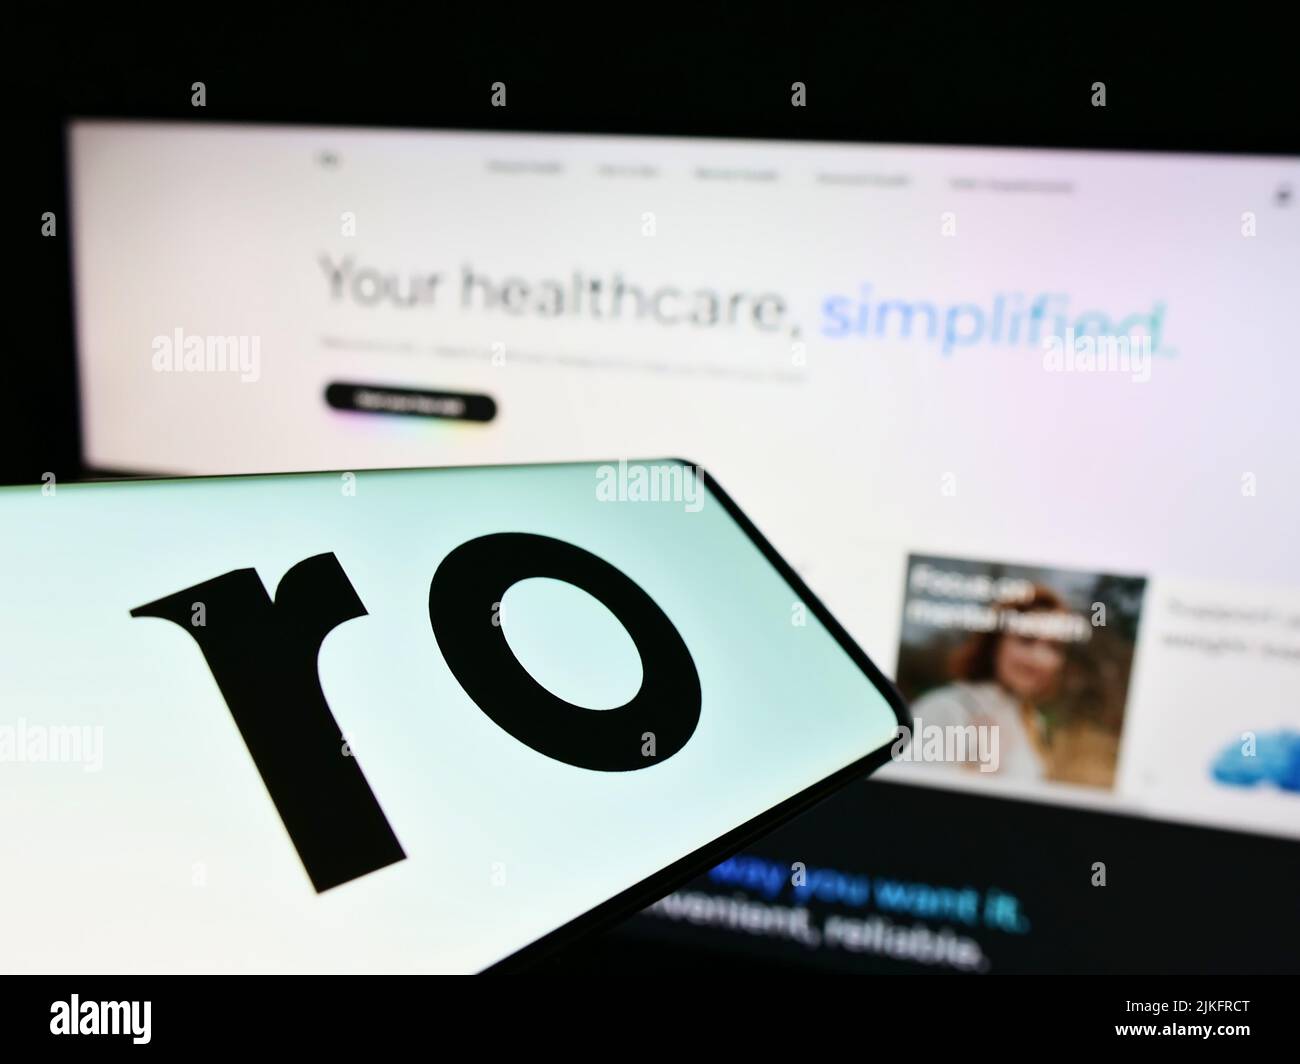 Mobile phone with logo of telehealth company Roman Health Ventures Inc. (Ro) on screen in front of website. Focus on center of phone display. Stock Photo